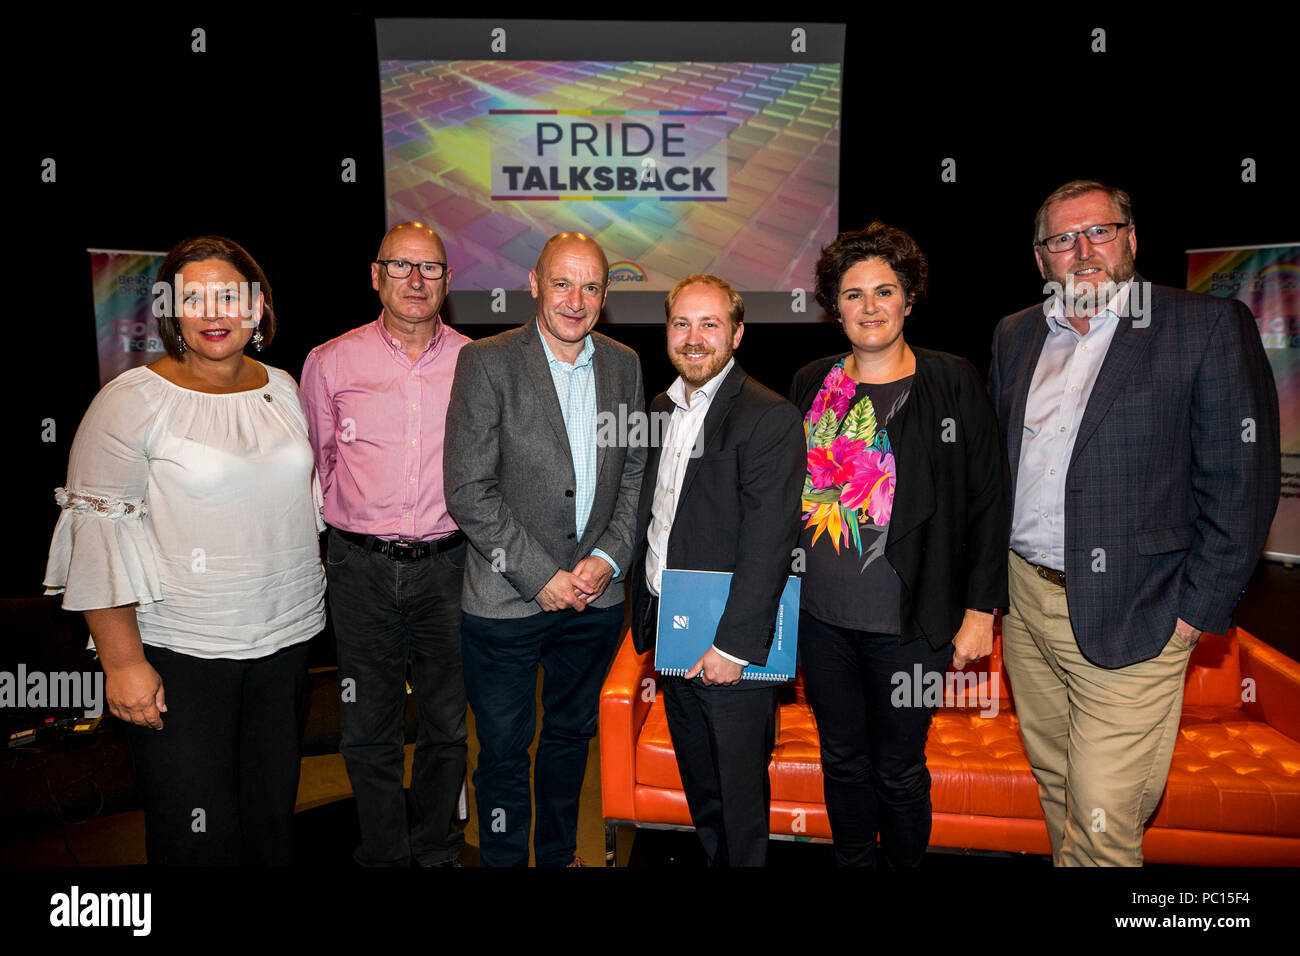 (left to right) Sinn Fein President Mary Lou McDonald, leader of the PUP Billy Hutchinson, Alliance MLA John Blair, Green Party NI leader Steven Agnew, SDLP MLA Claire Hanna, and UUP MLA Doug Beatie pose after the Belfast Pride political debate at The Mac Theatre in Belfast to address a wide range of equality issues in Northern Ireland at part of the 2018 Belfast Pride Festival. Stock Photo